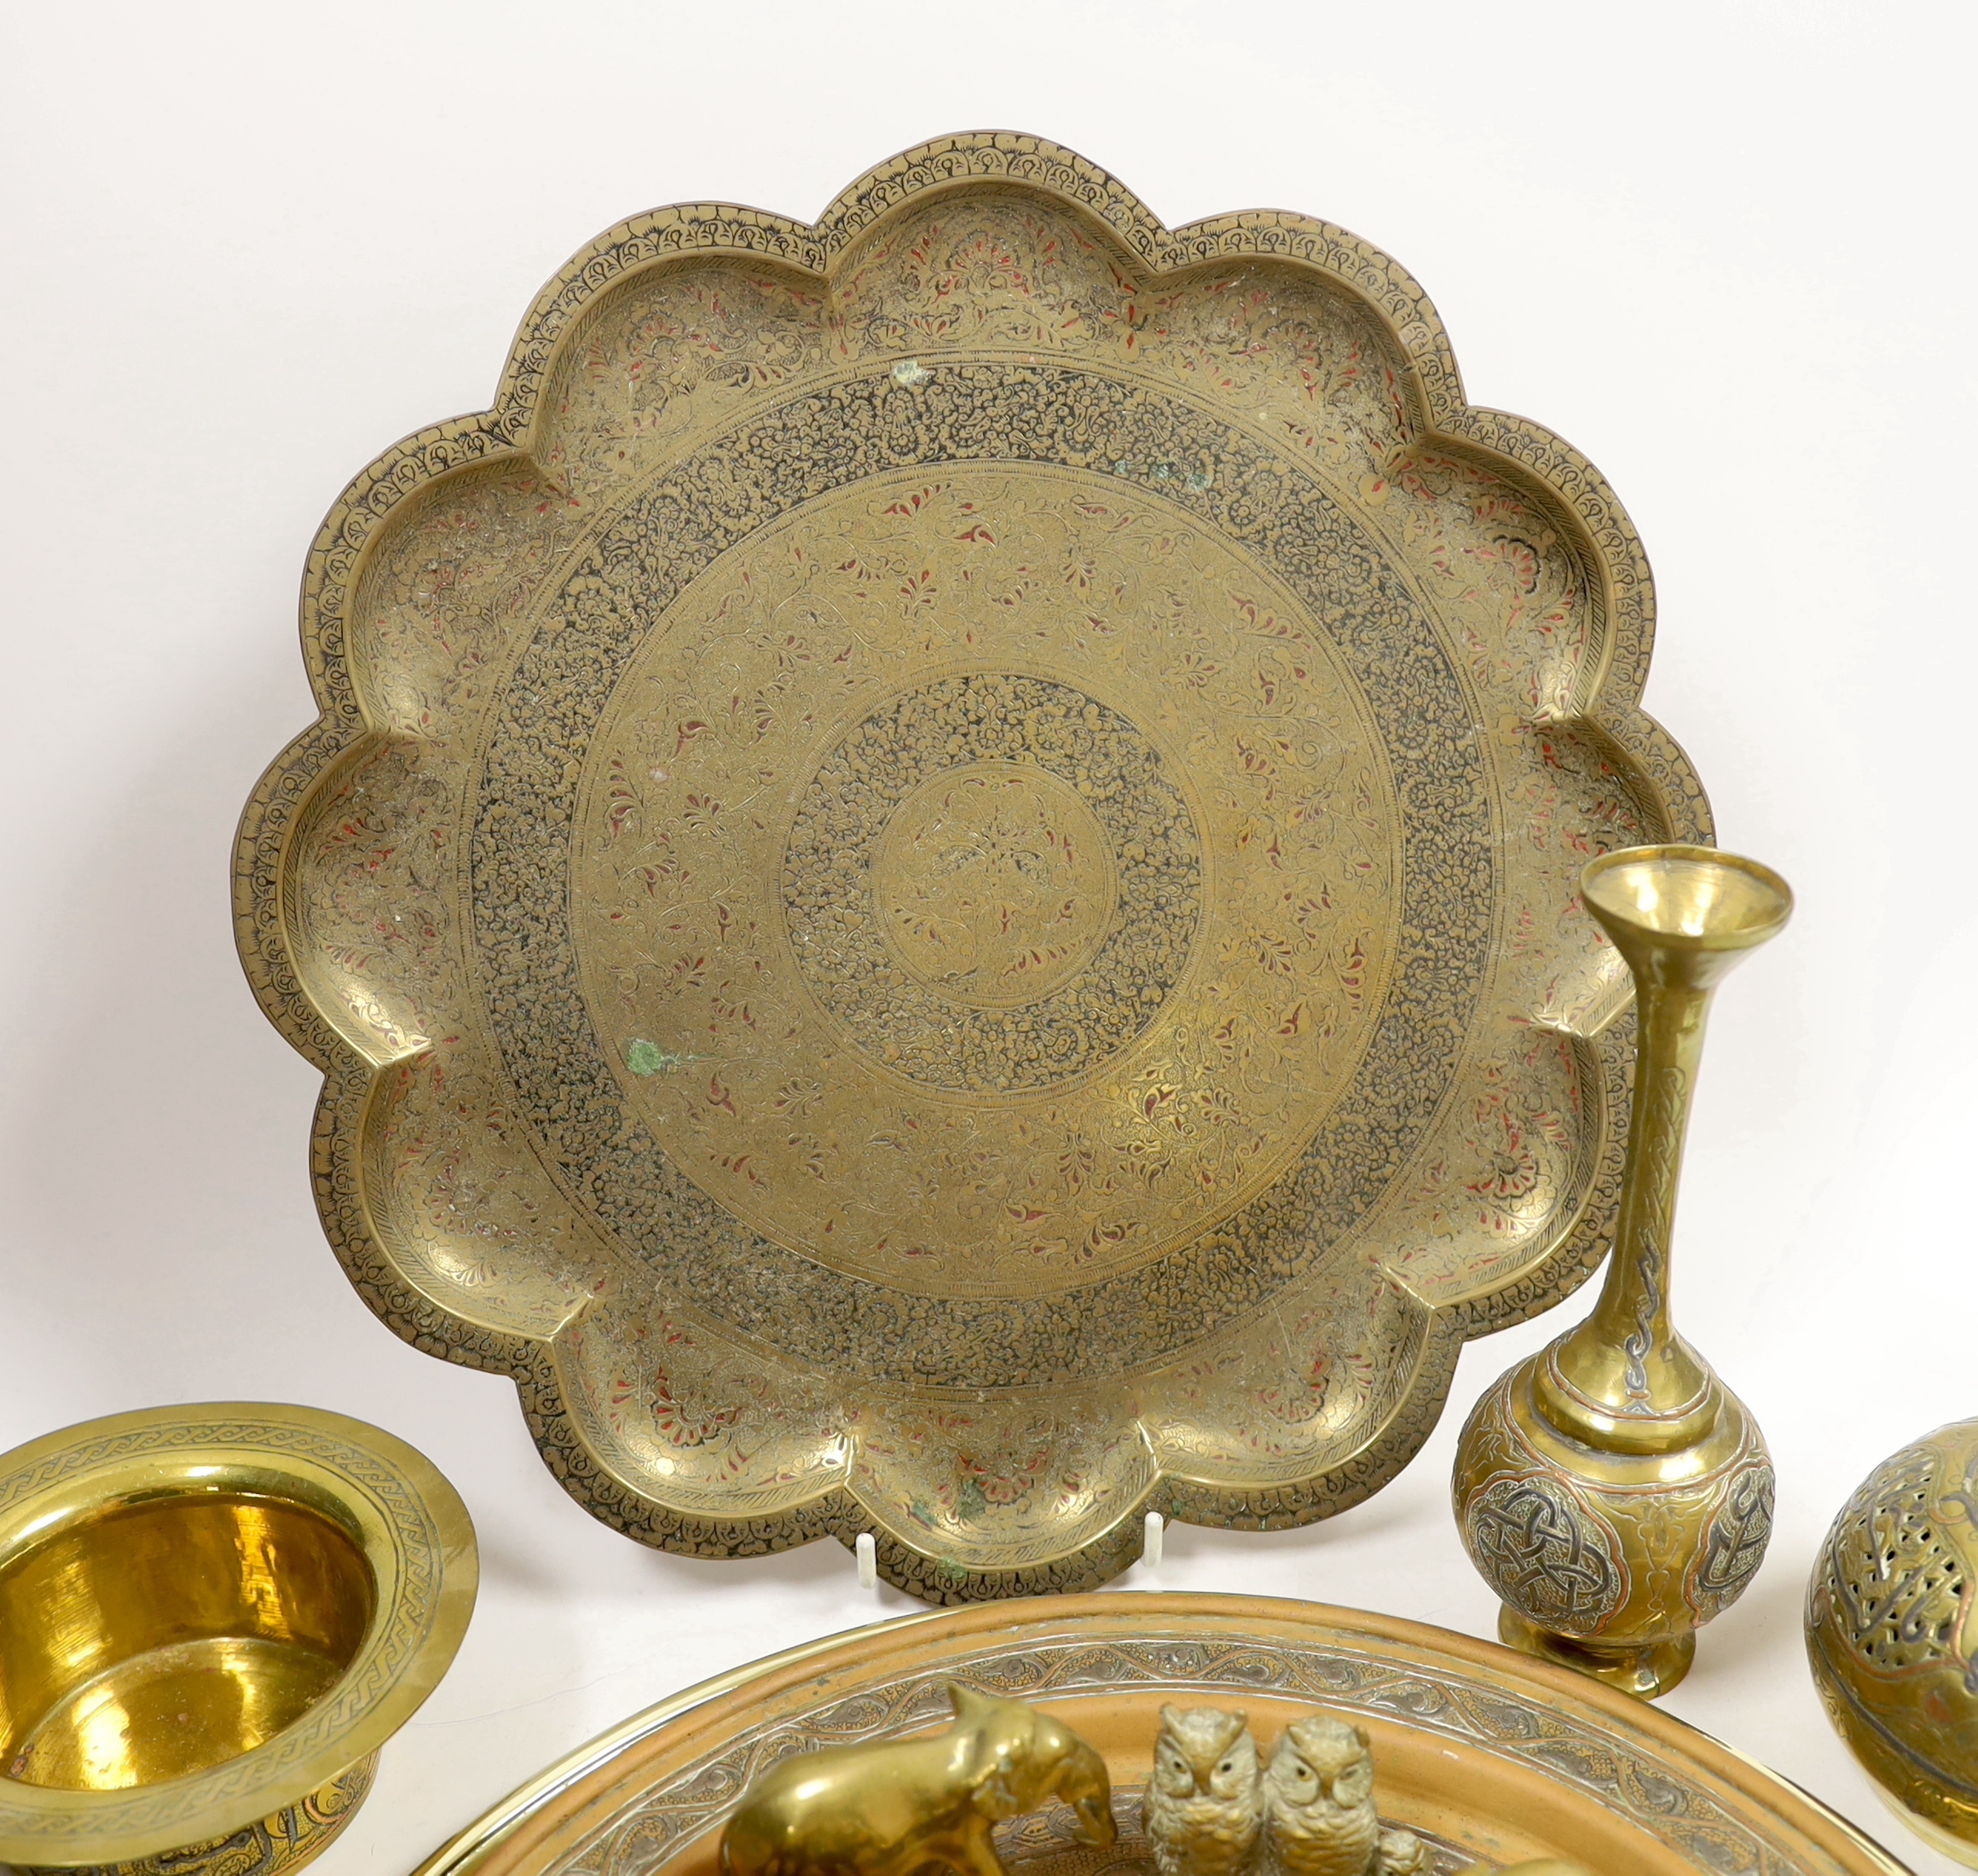 A group of Persian metal and brassware